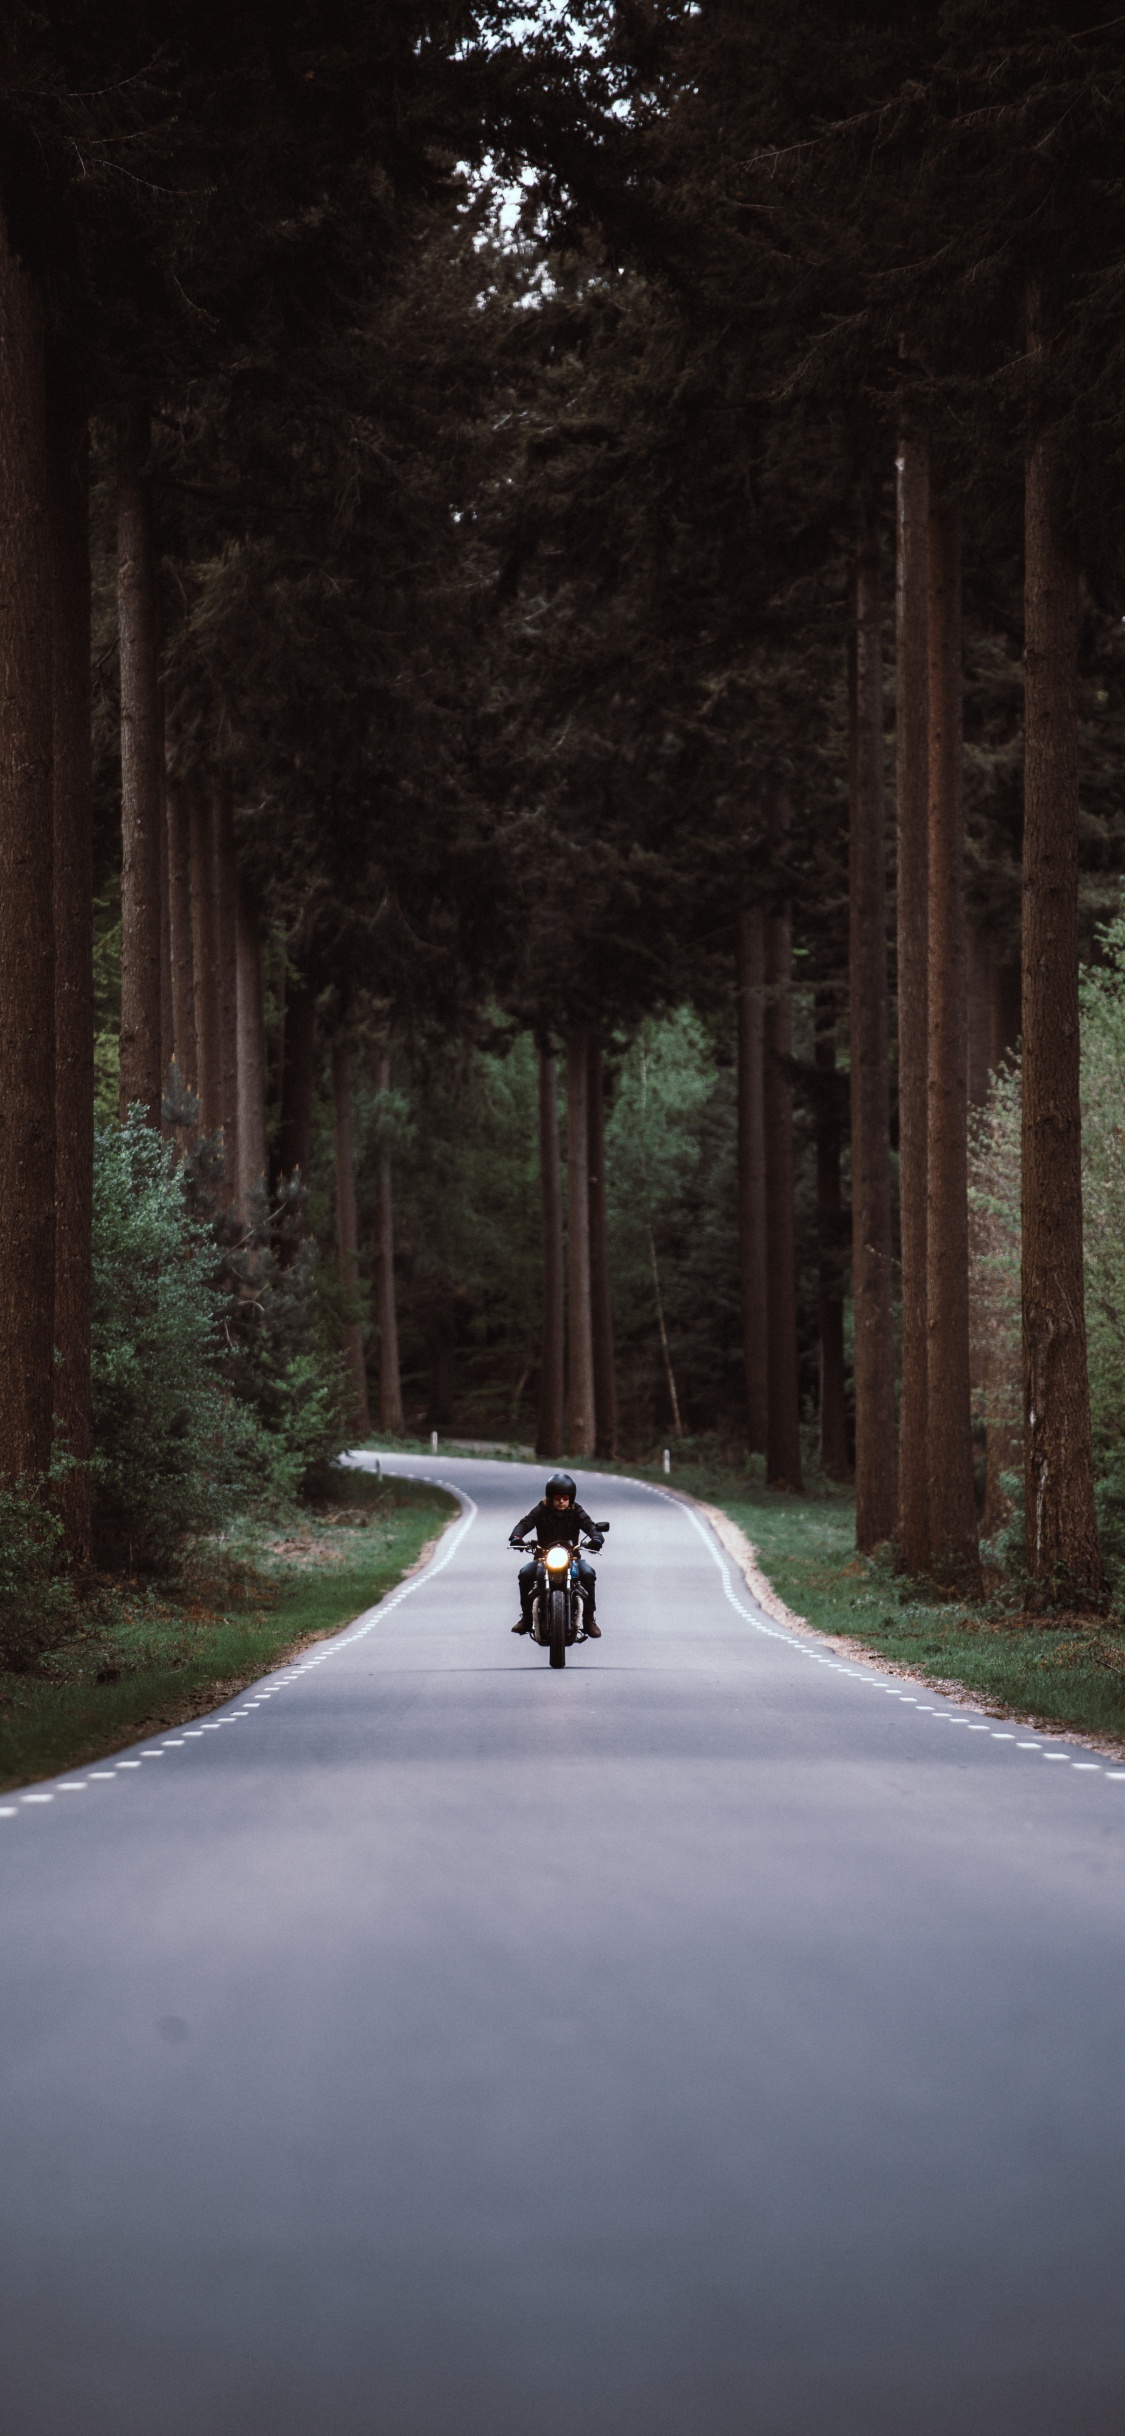 Person Riding Motorcycle on Road Between Trees During Daytime. Wallpaper in 1125x2436 Resolution